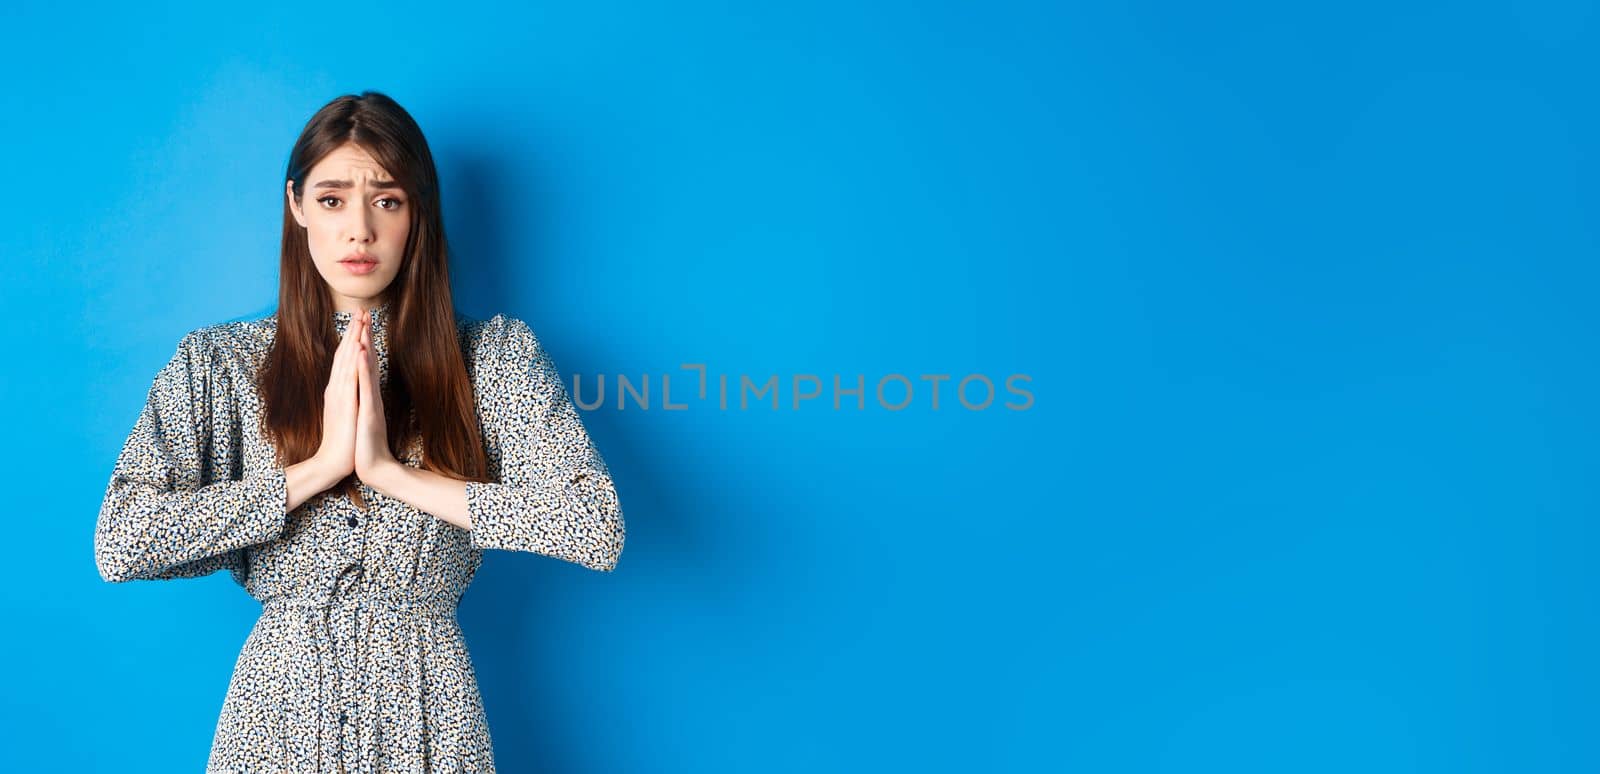 Sad girl asking for help, begging you with troubled face expression, standing in dress on blue background.